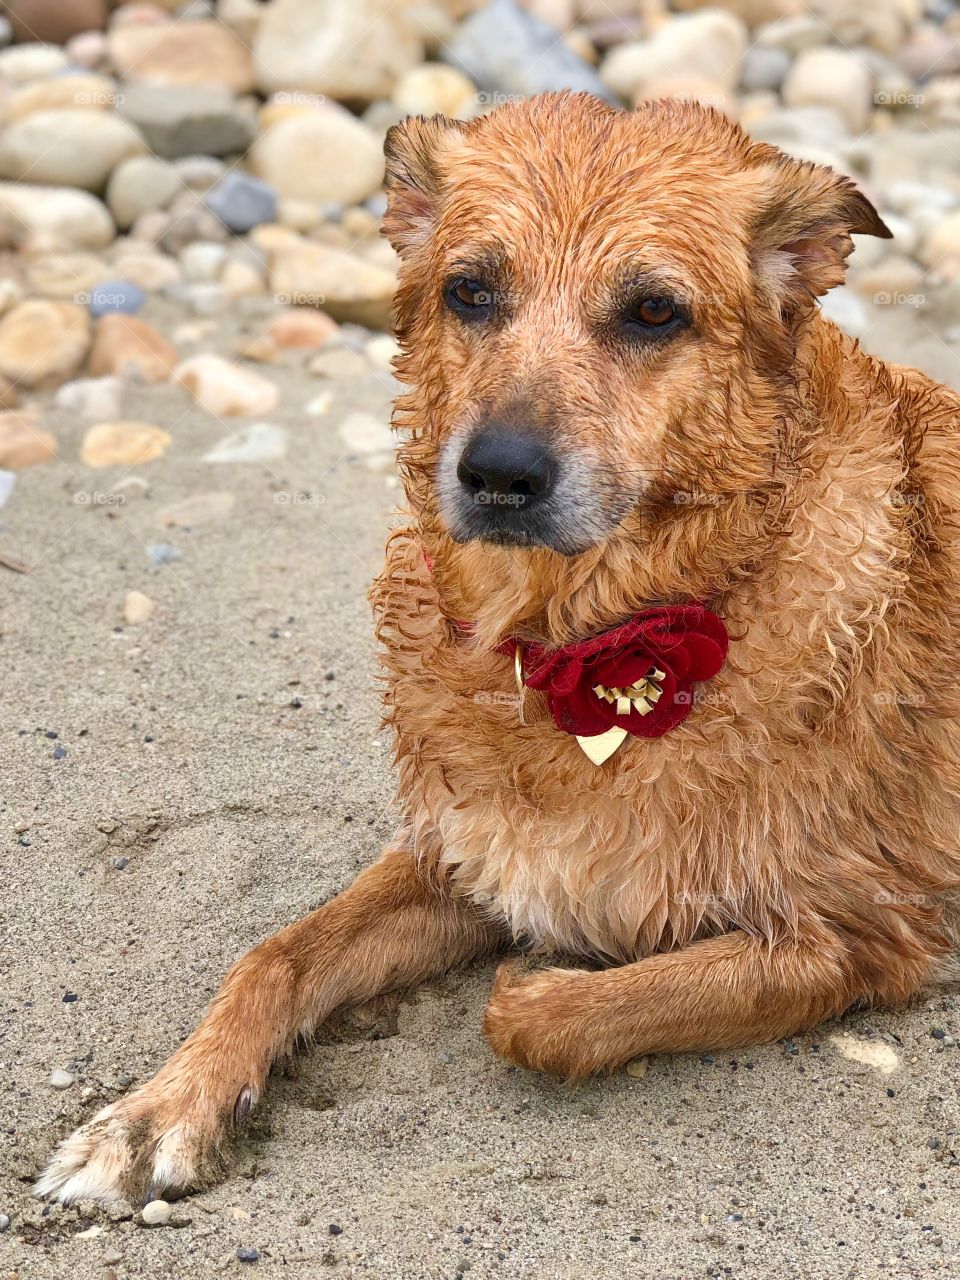 Wet dog after playing in a lake. Laying and resting on a sandy beach with rocks behind. Big red collar. Daytime wirh good lighting. Border collie cross german sheppard. 